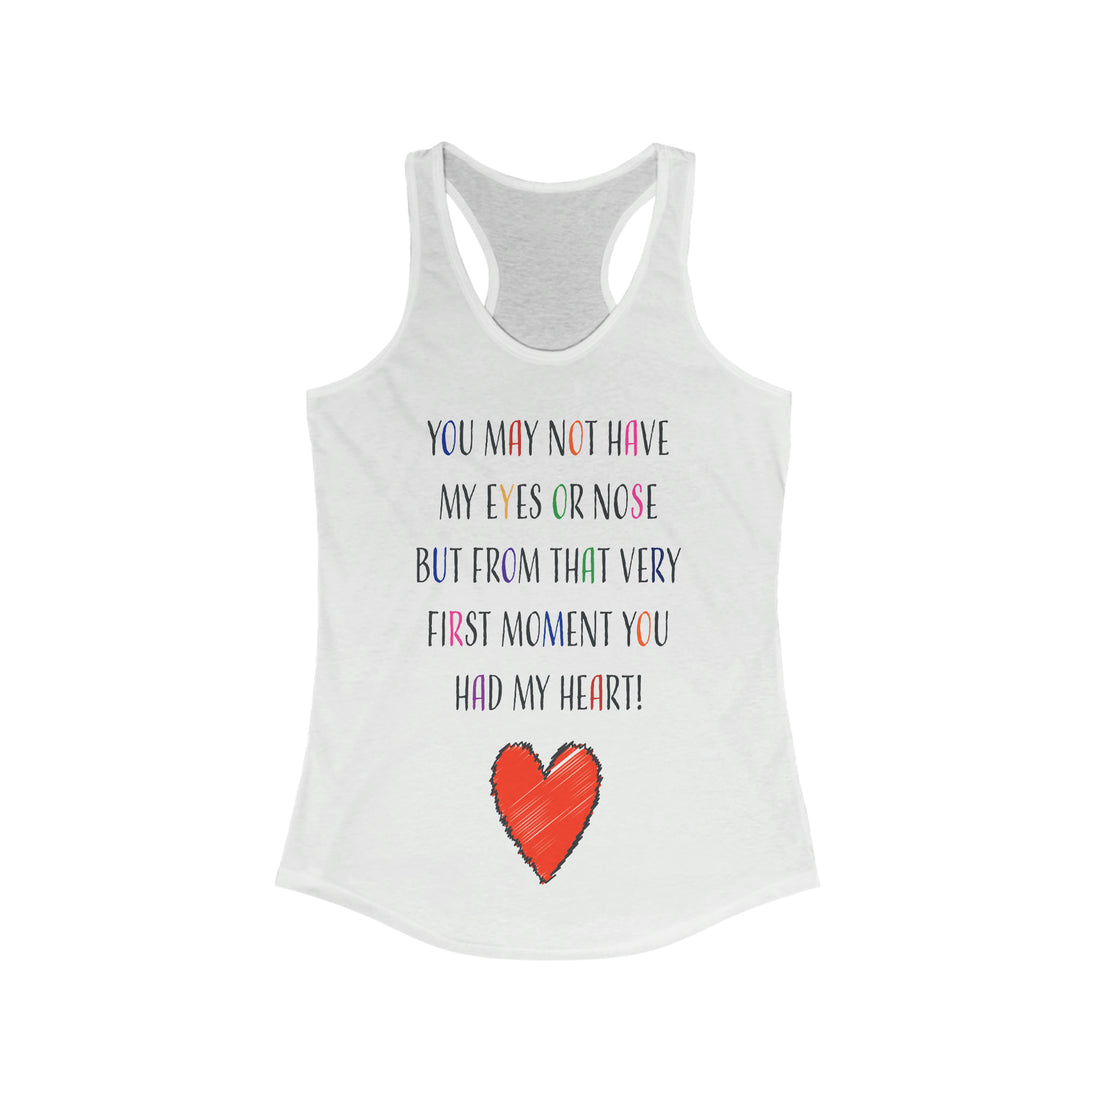 You May Not Have My Eyes Or Nose But From That Very First Moment You Had My HEART - Racerback Tank